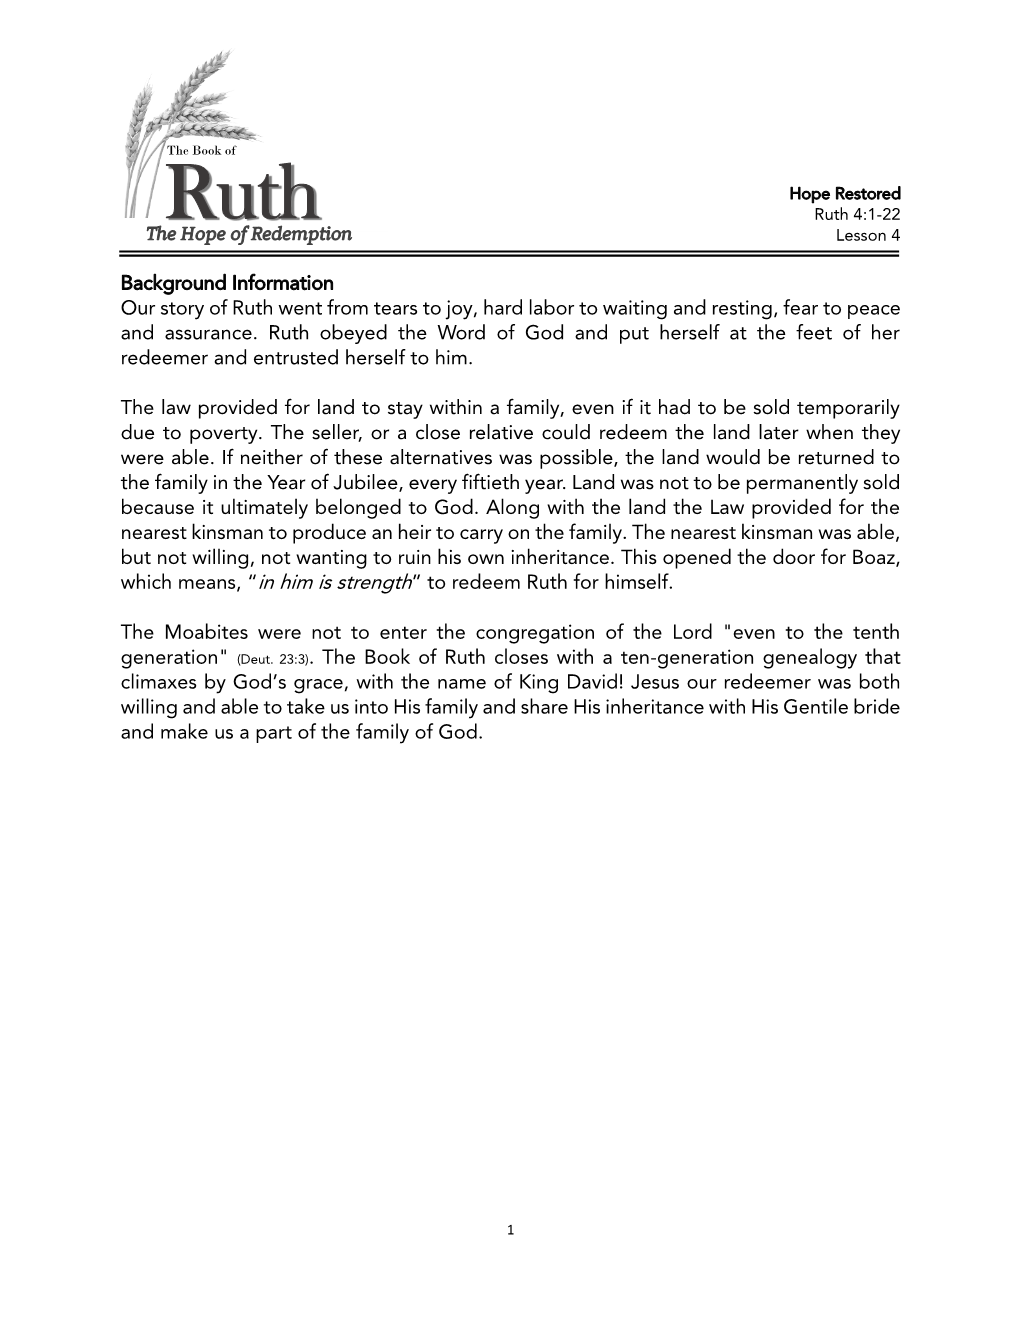 Background Information Our Story of Ruth Went from Tears to Joy, Hard Labor to Waiting and Resting, Fear to Peace and Assurance